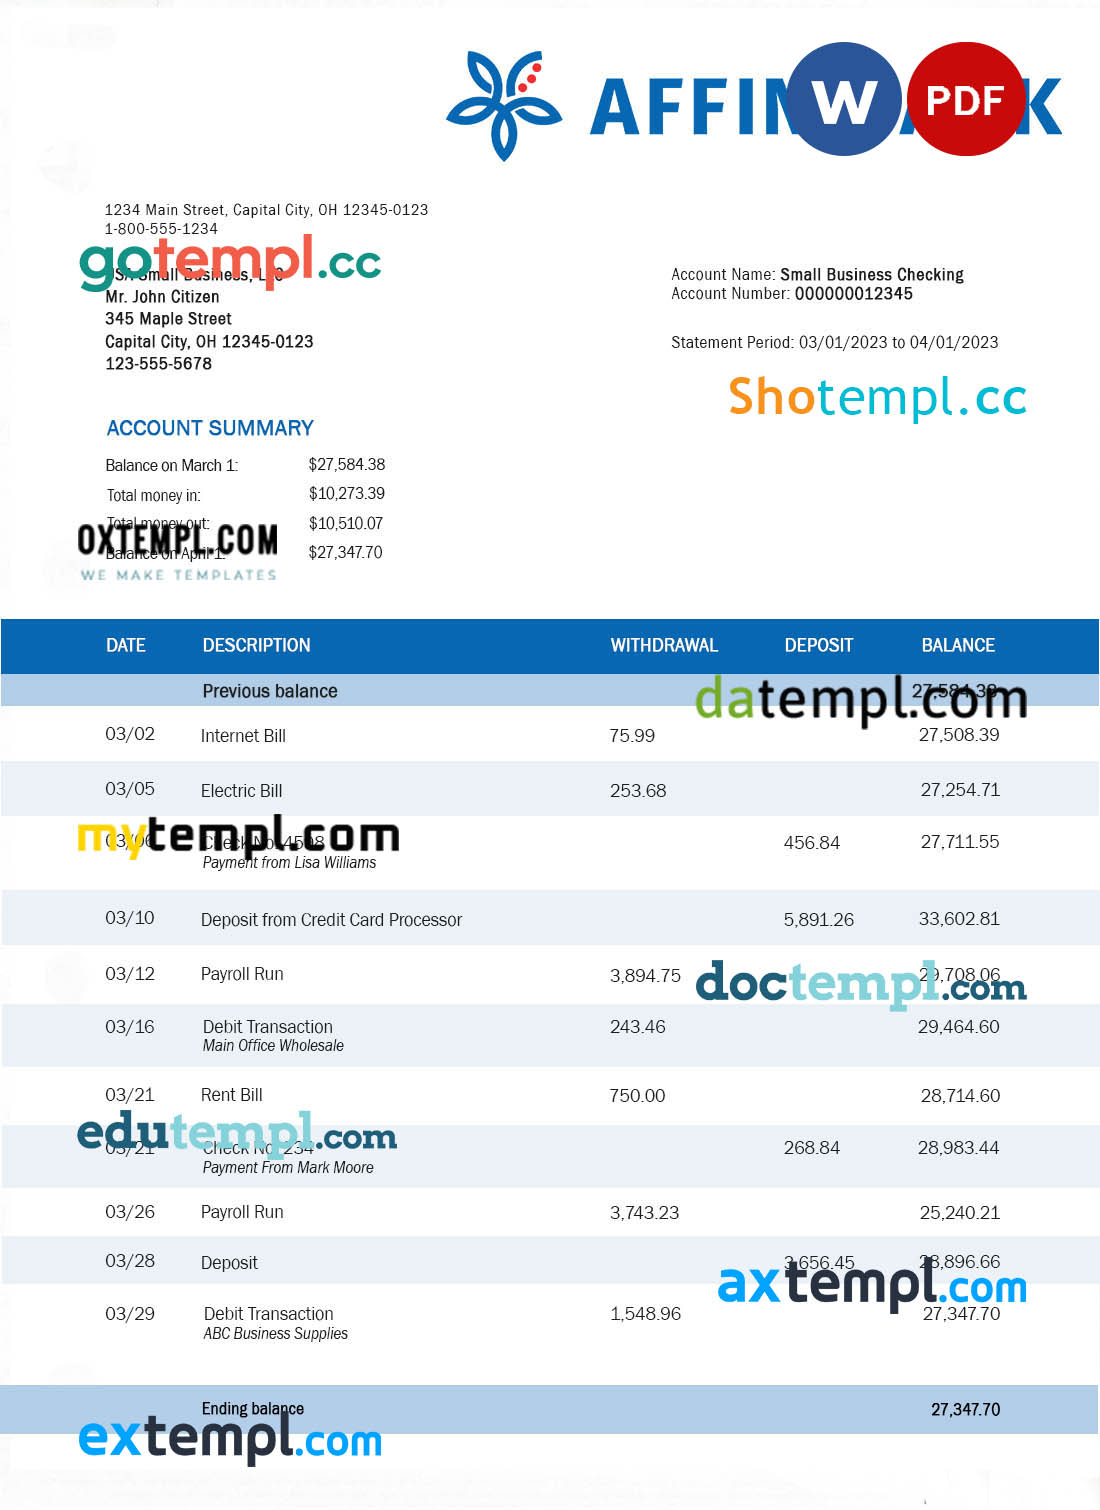 editable template, Affin Bank company checking account statement Word and PDF template